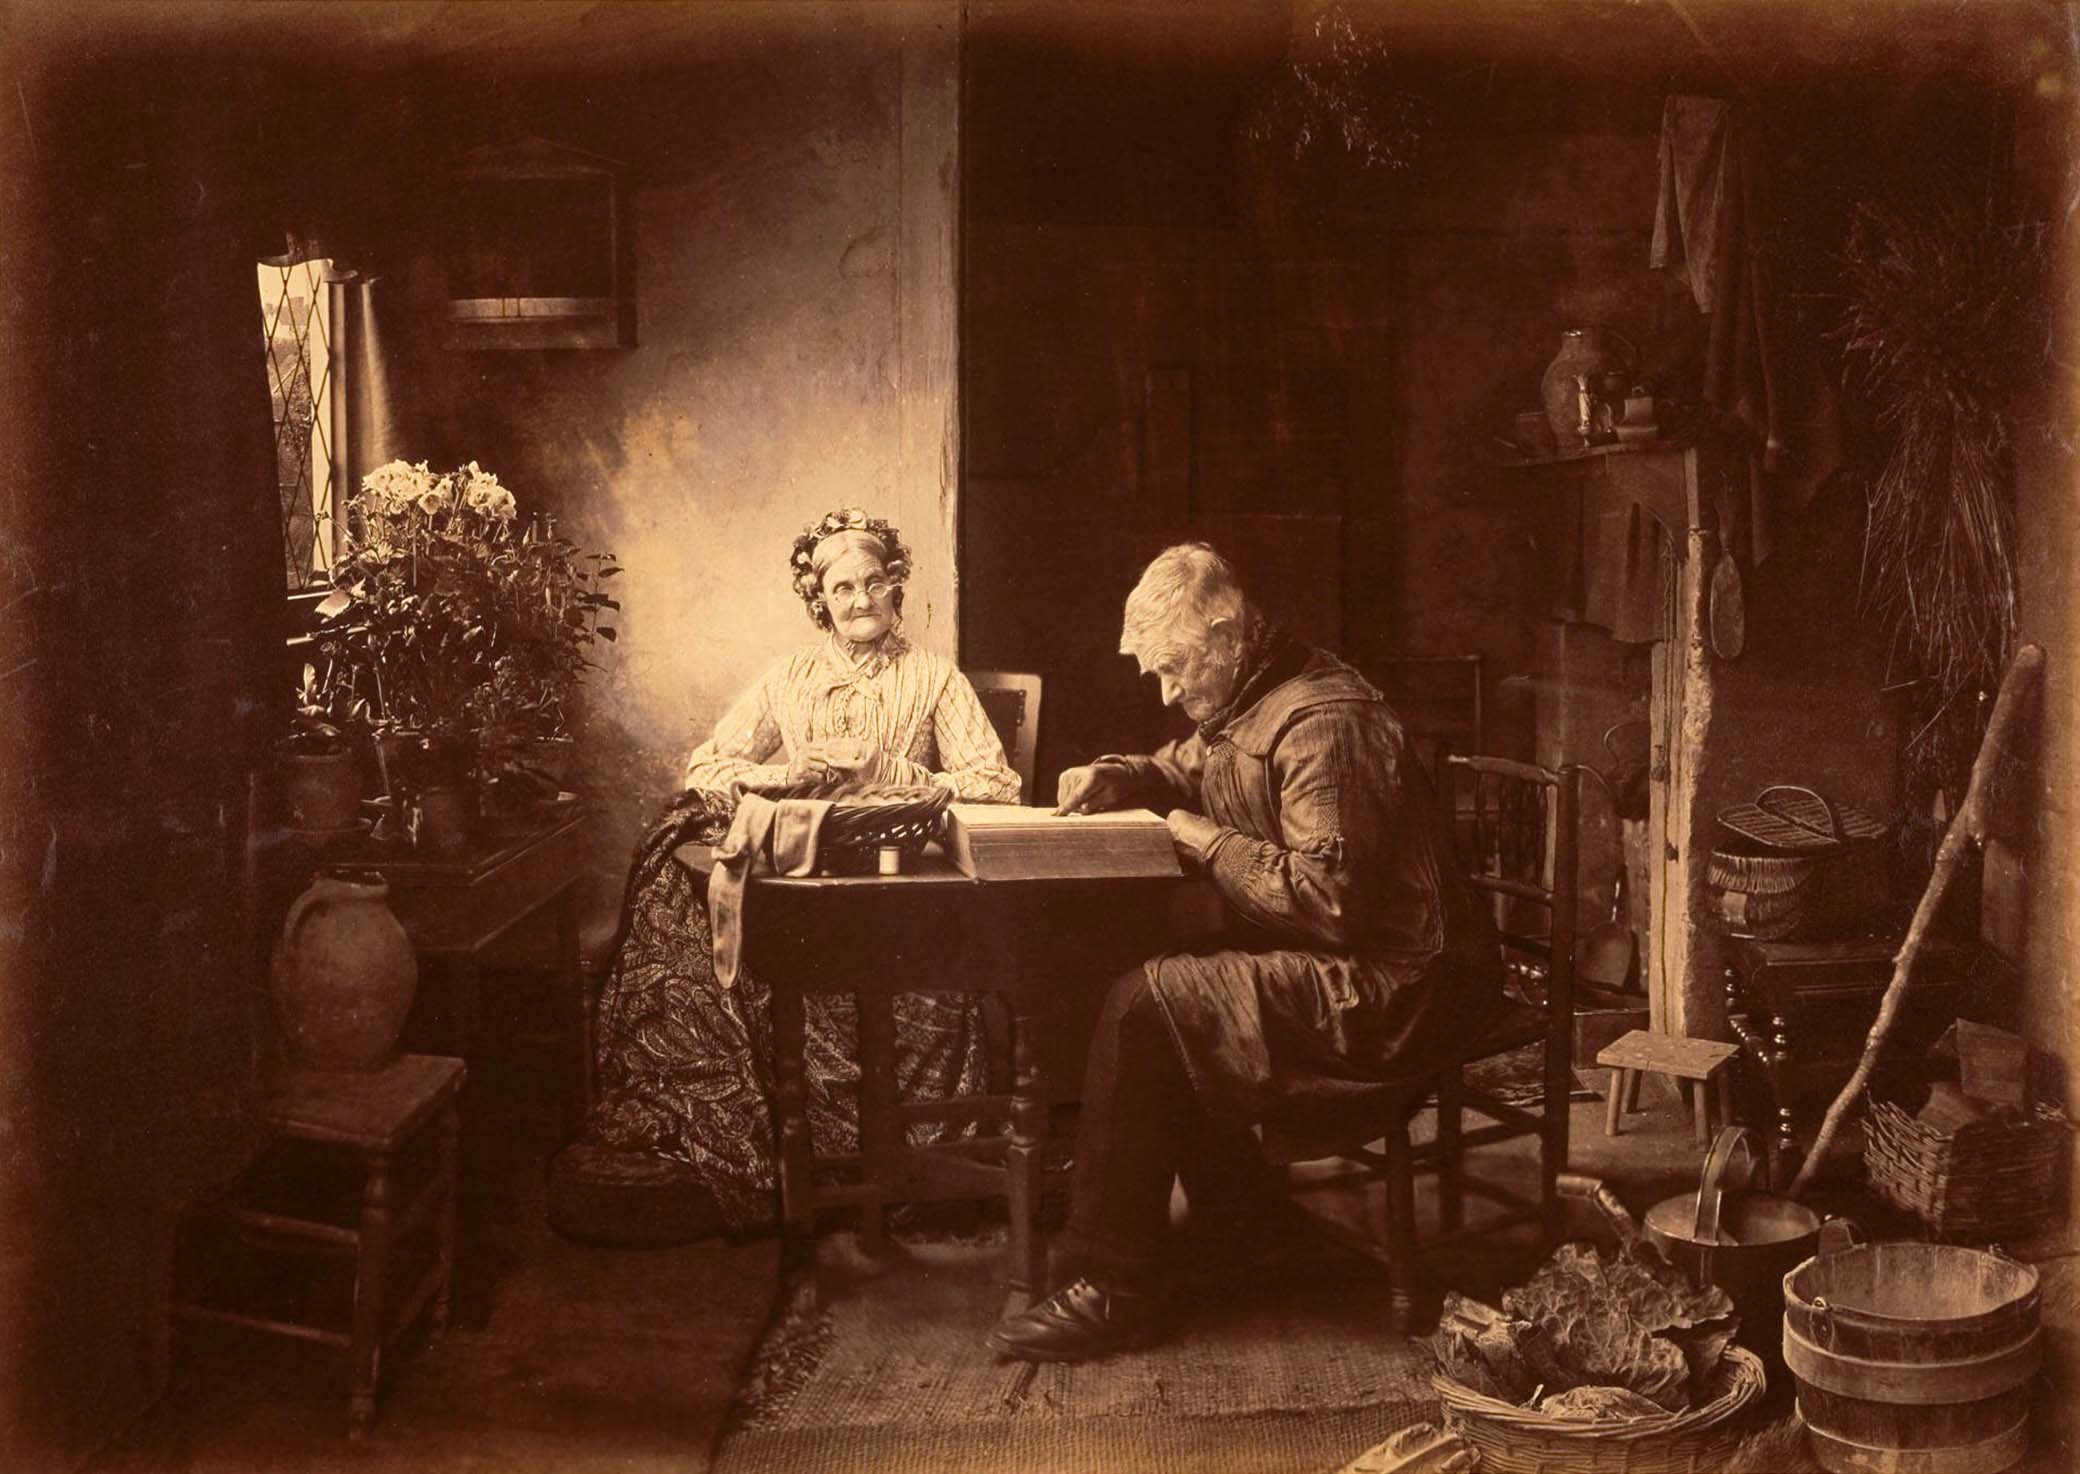 When the Day's Work is Done, by Henry Peach Robinson, 1877